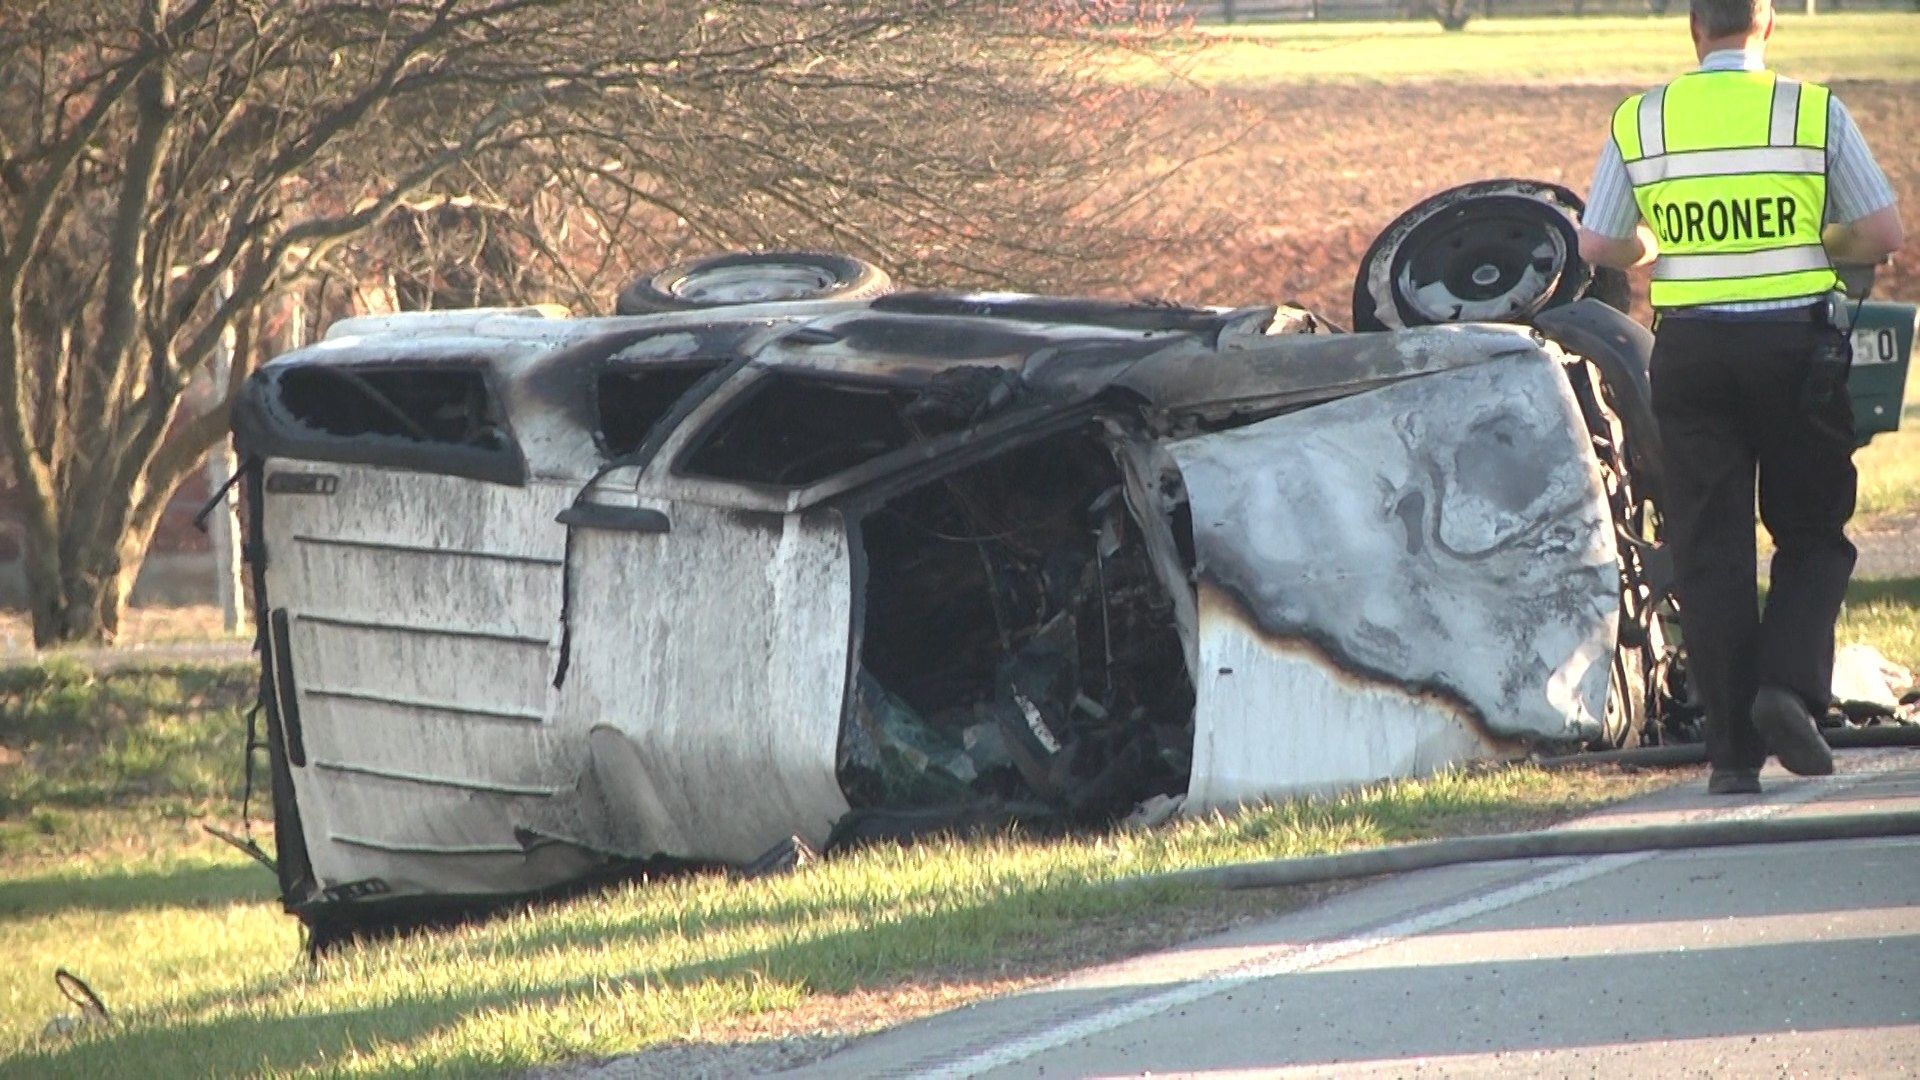 Fiery Crash Claims Life Of Bowling Green Man